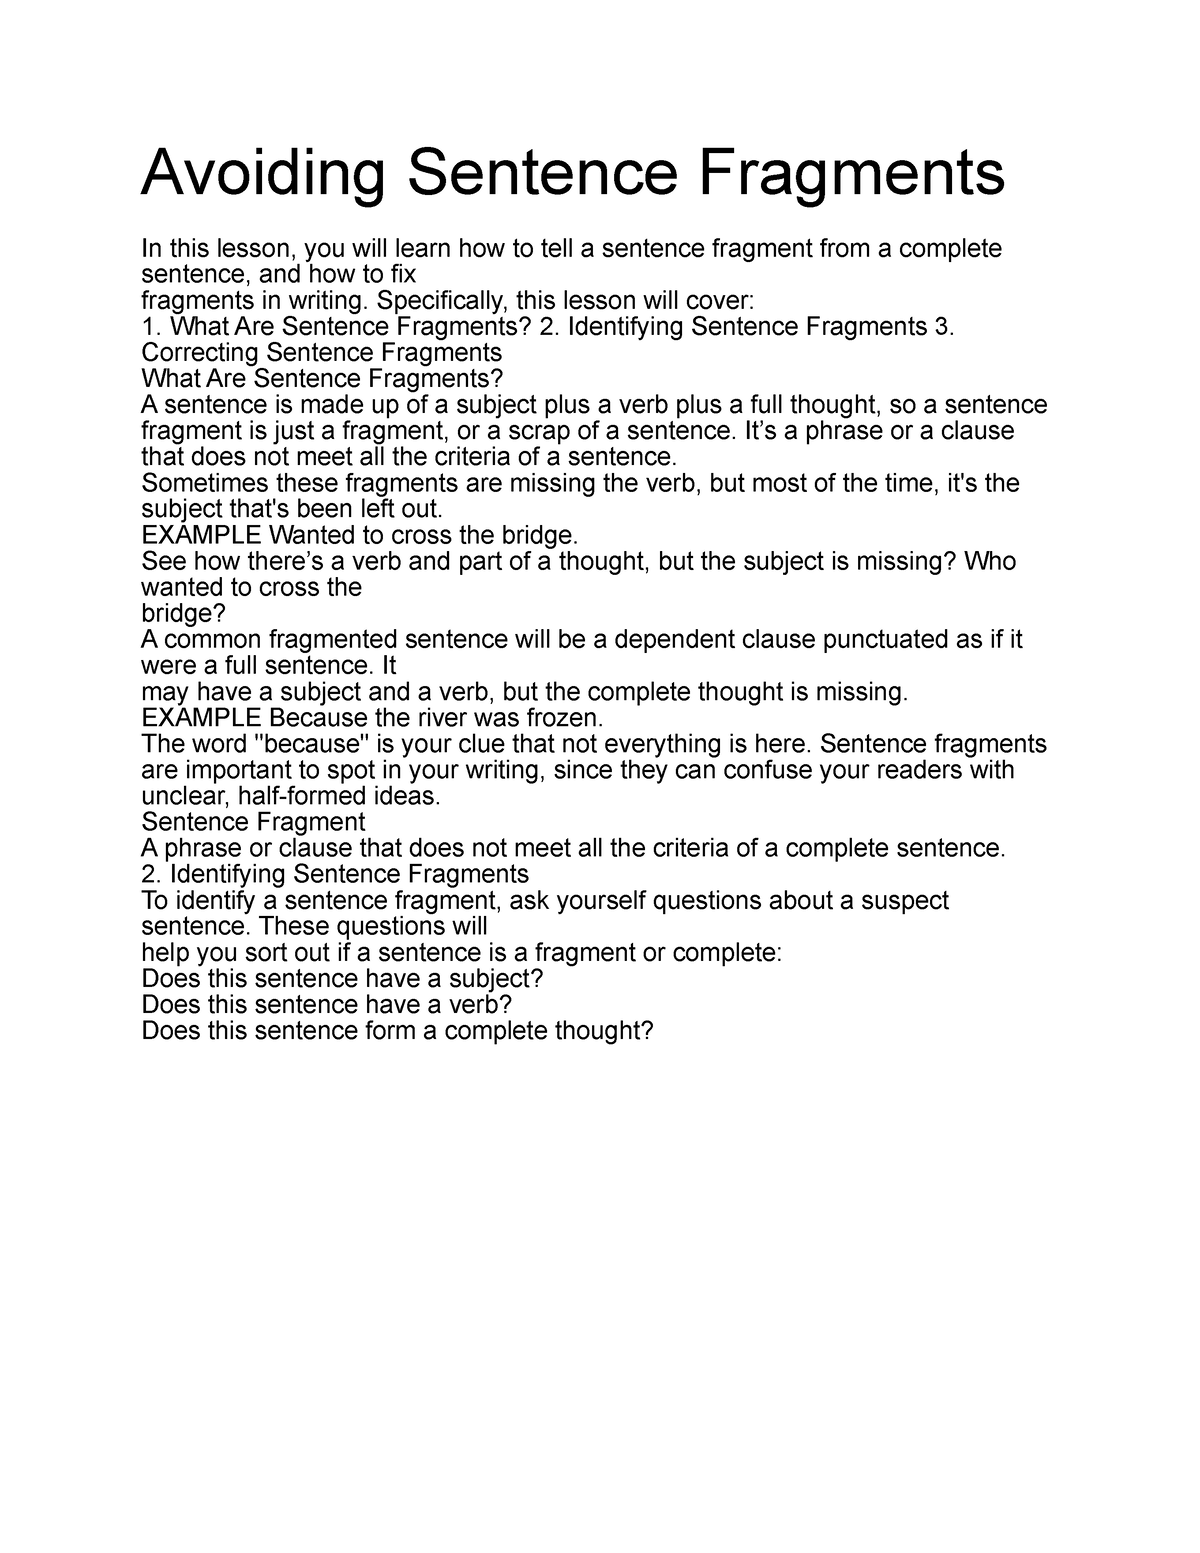 Avoiding Sentence Fragments Specifically This Lesson Will Cover What Are Sentence Fragments